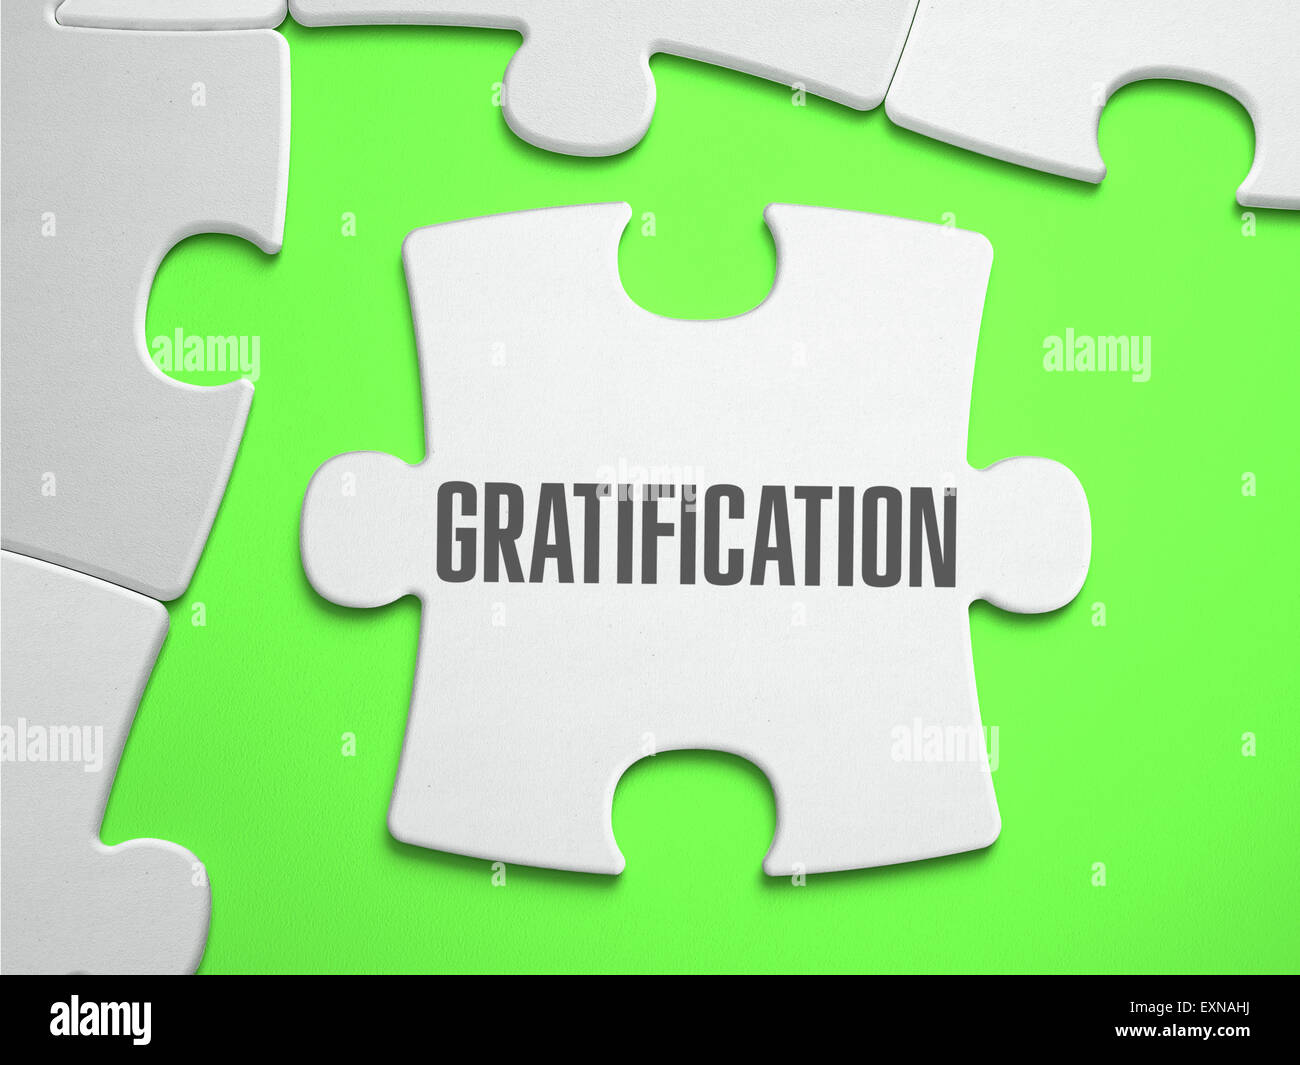 Gratification - Jigsaw Puzzle with Missing Pieces. Stock Photo